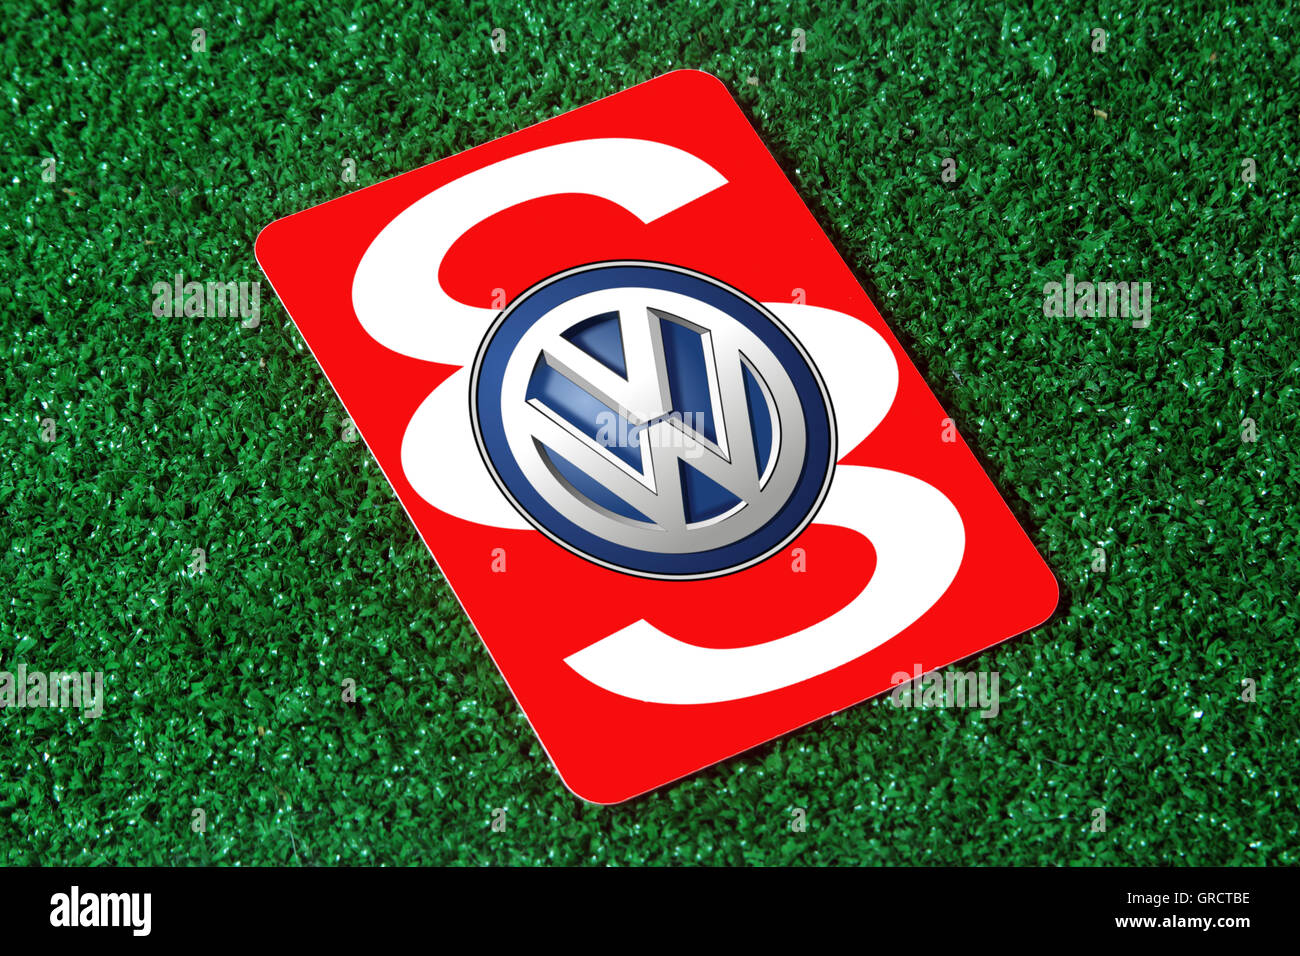 Red Card With Vw Sign And Paragraph On Green Turf Stock Photo